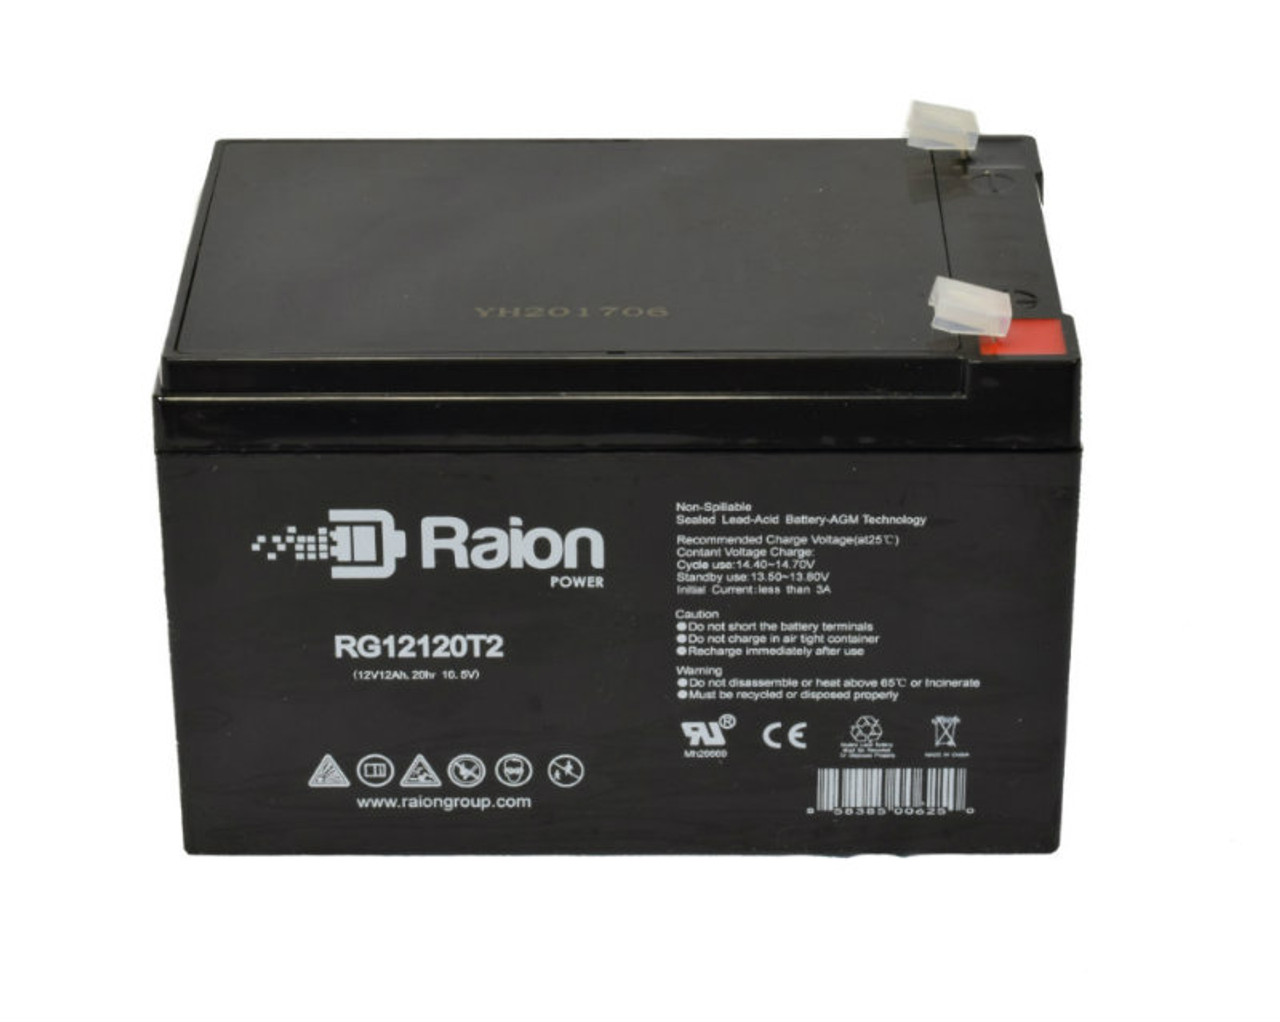 Raion Power RG12120T2 SLA Battery for Safety 1st 50504/50504A